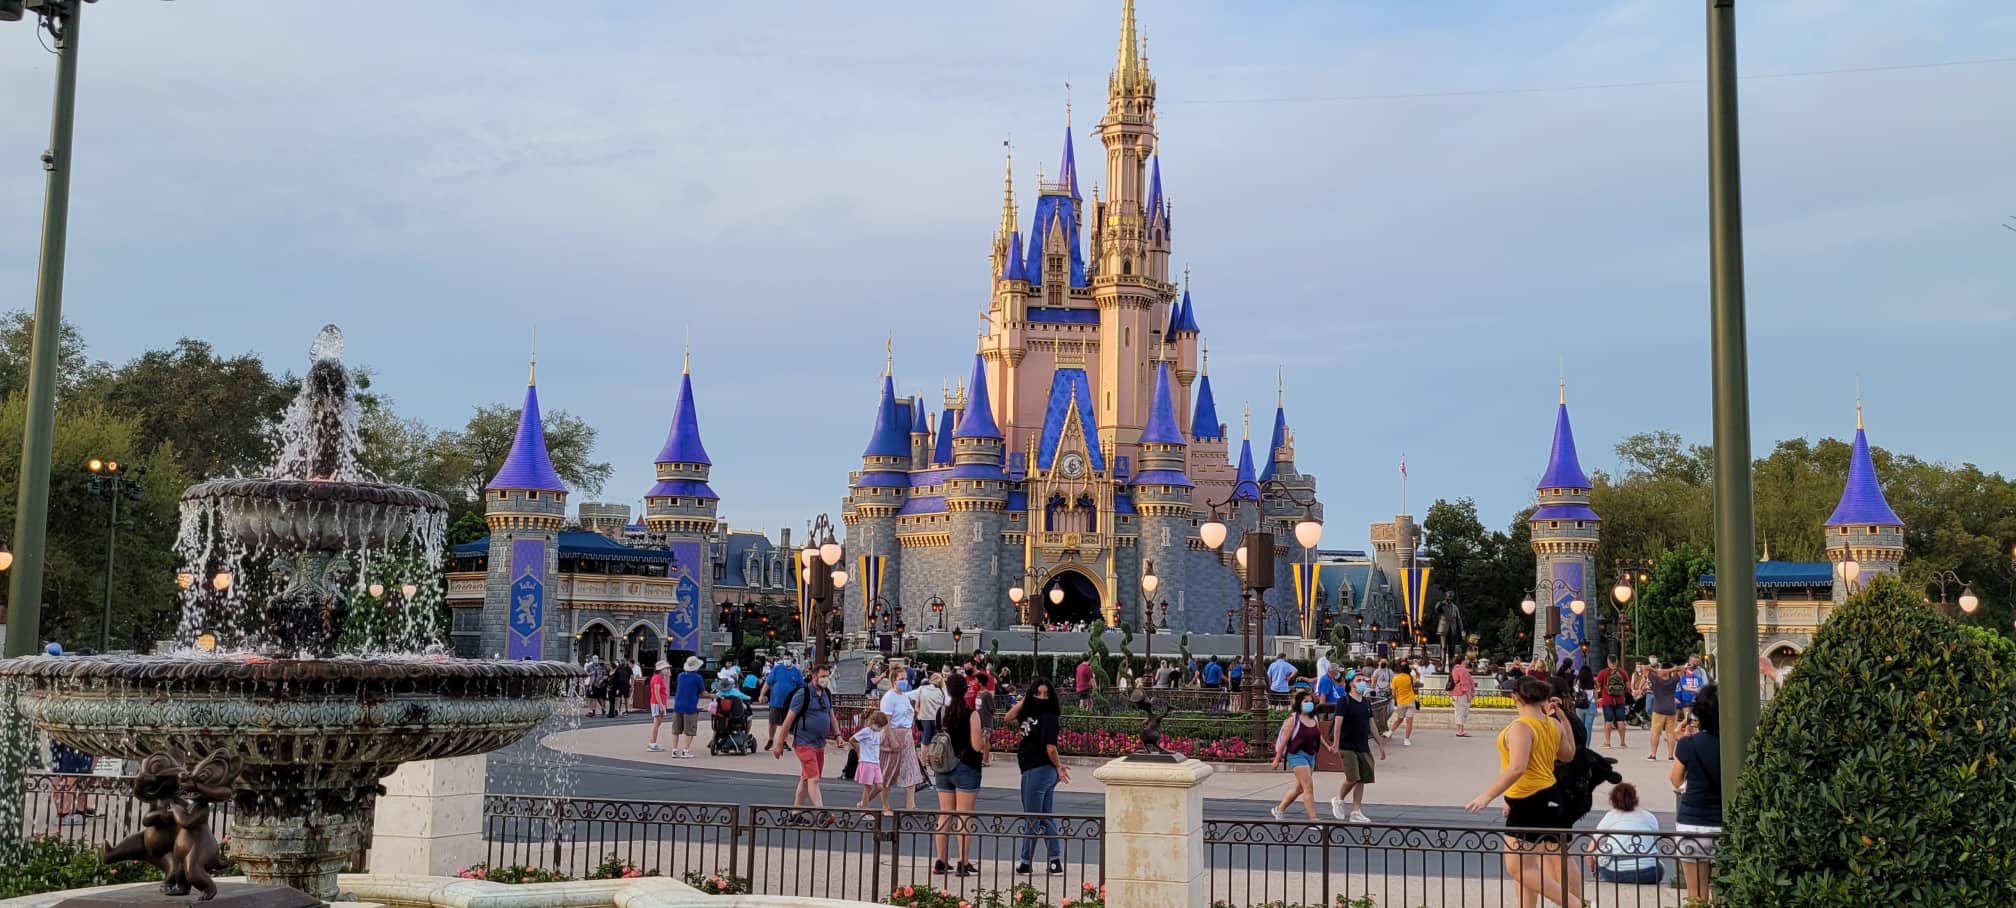 Disney World Park Hours extended through May 22nd